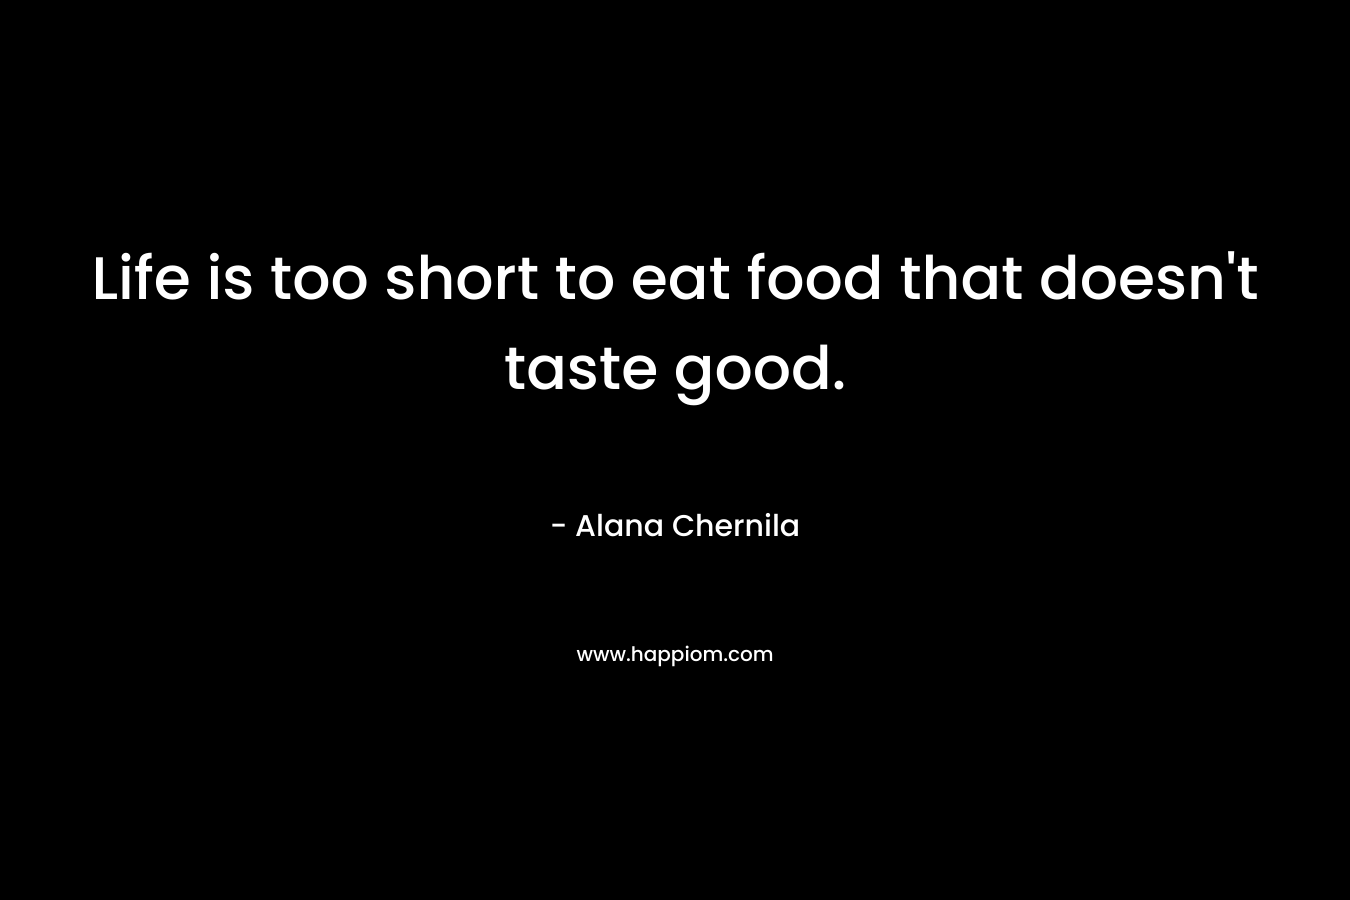 Life is too short to eat food that doesn't taste good.